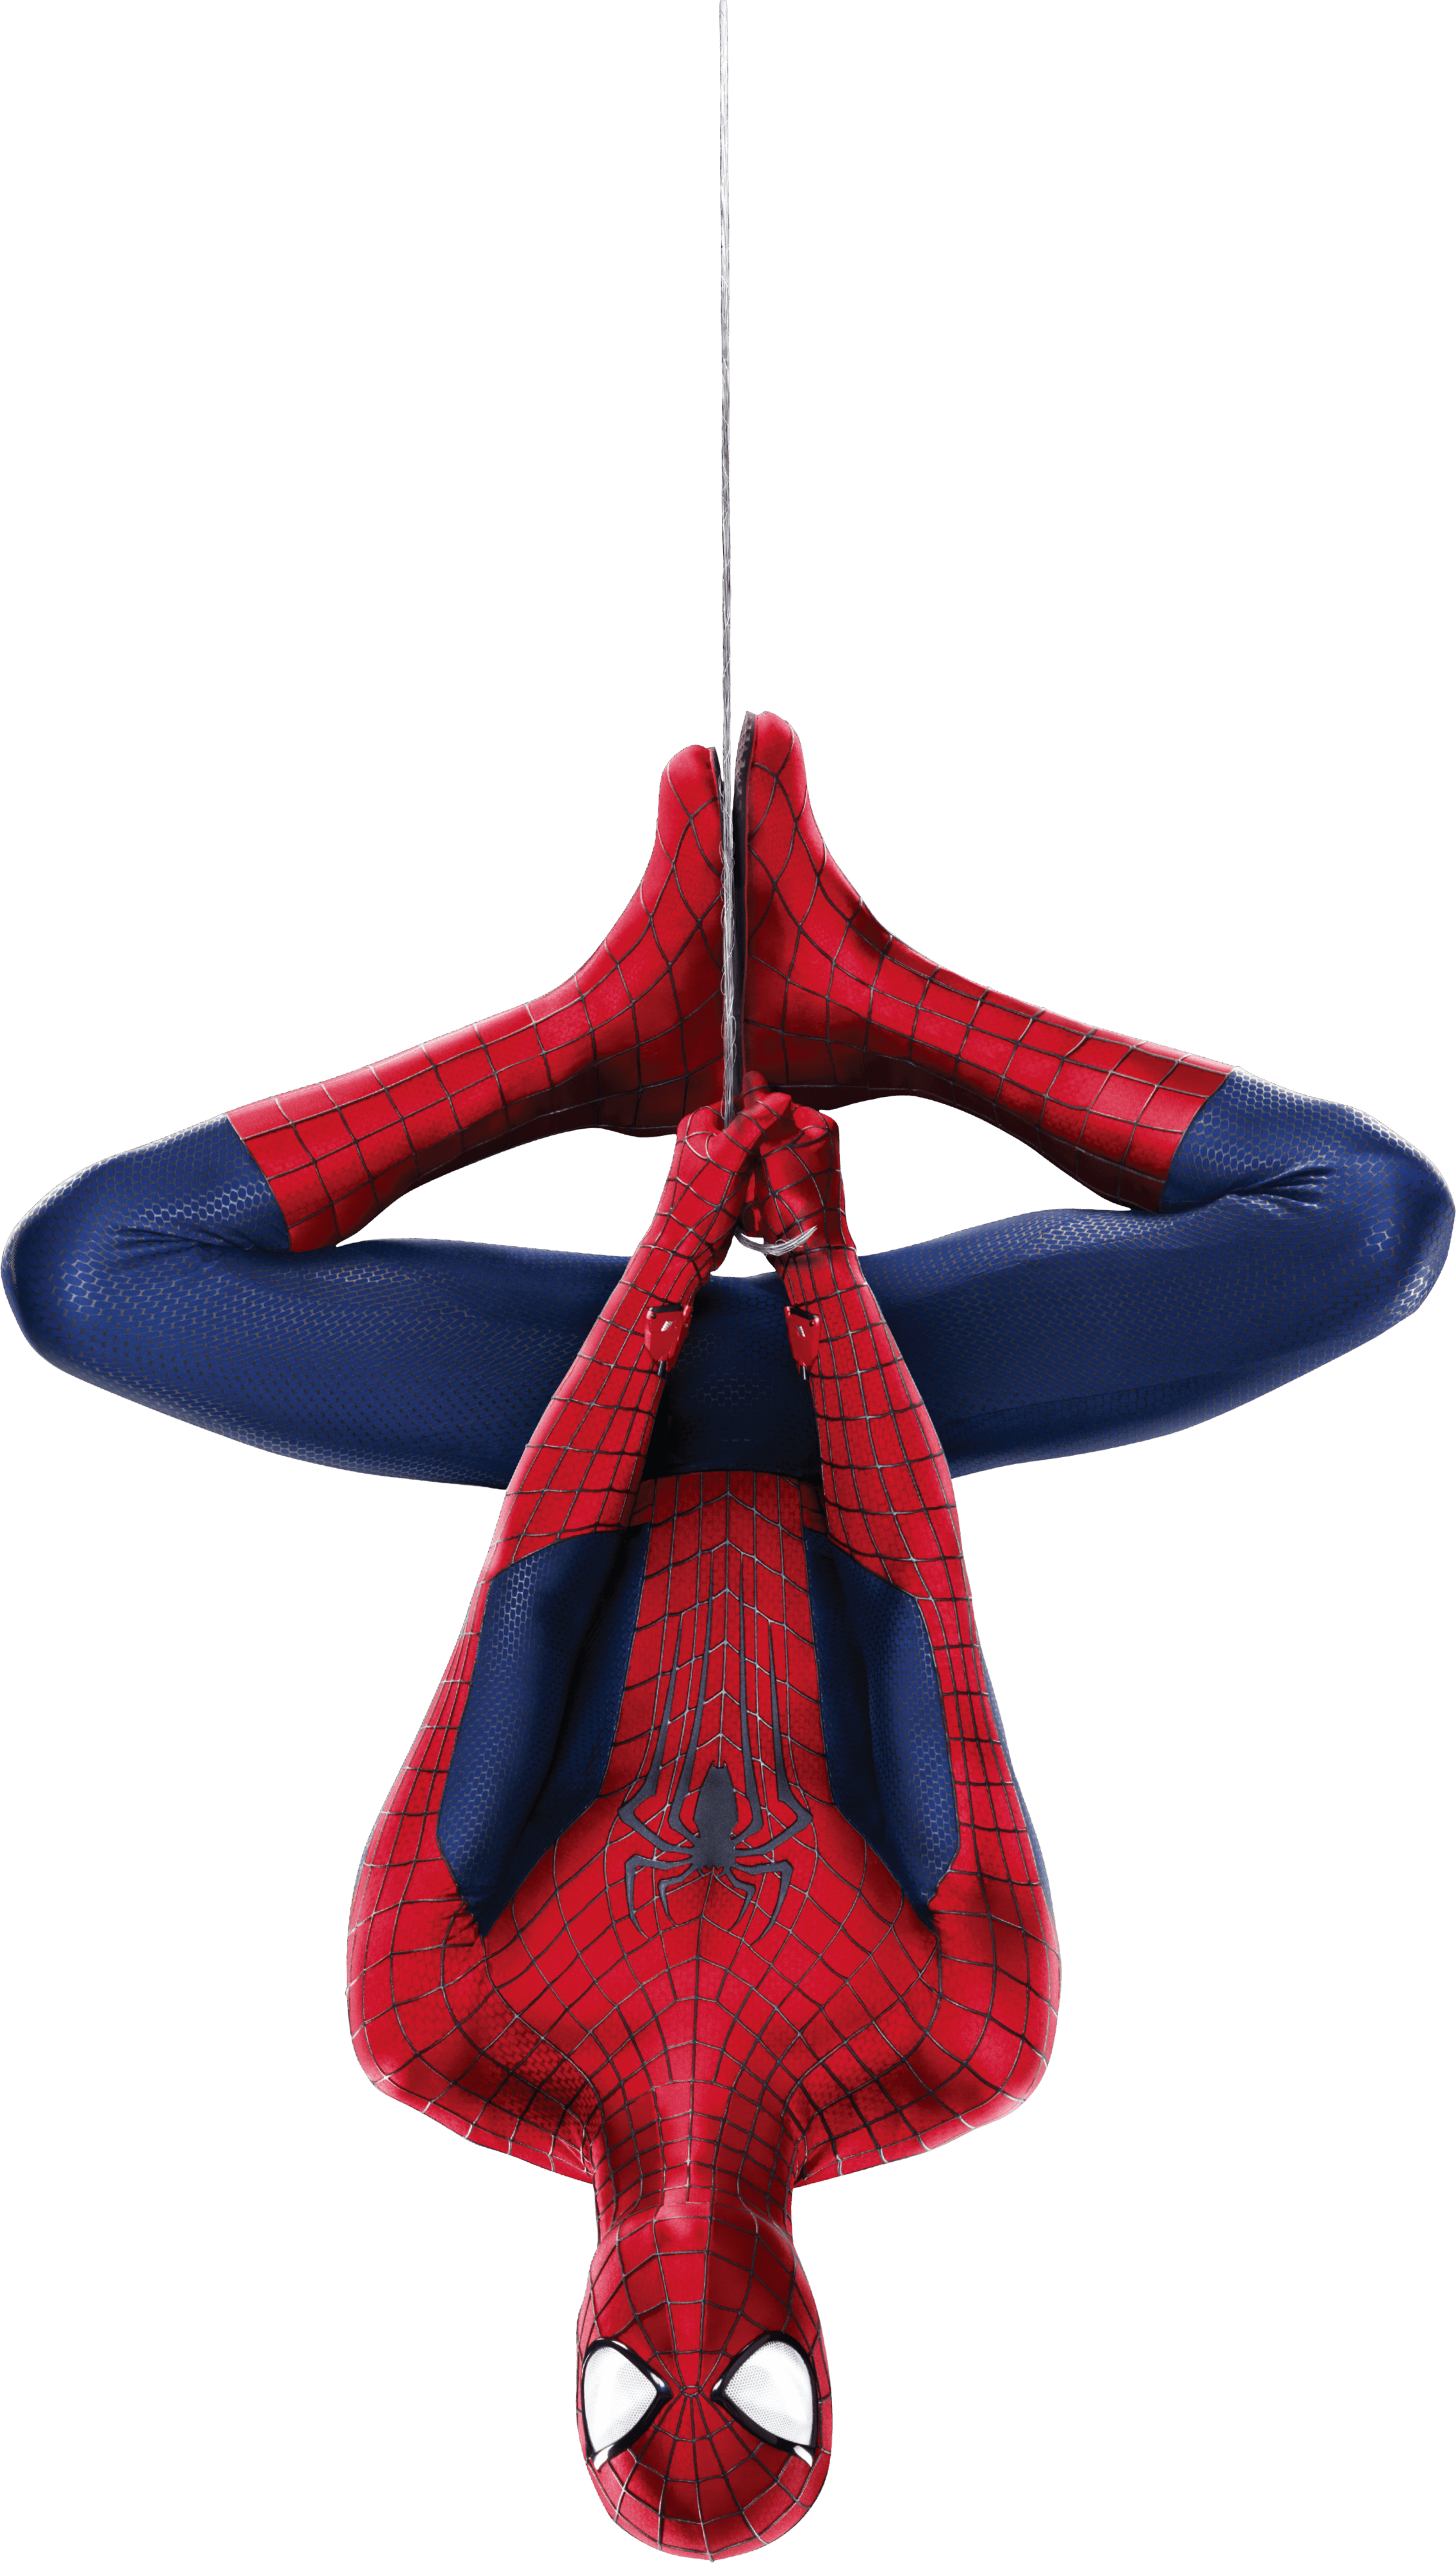 Amazing SpiderMan PNG Image for Free Download